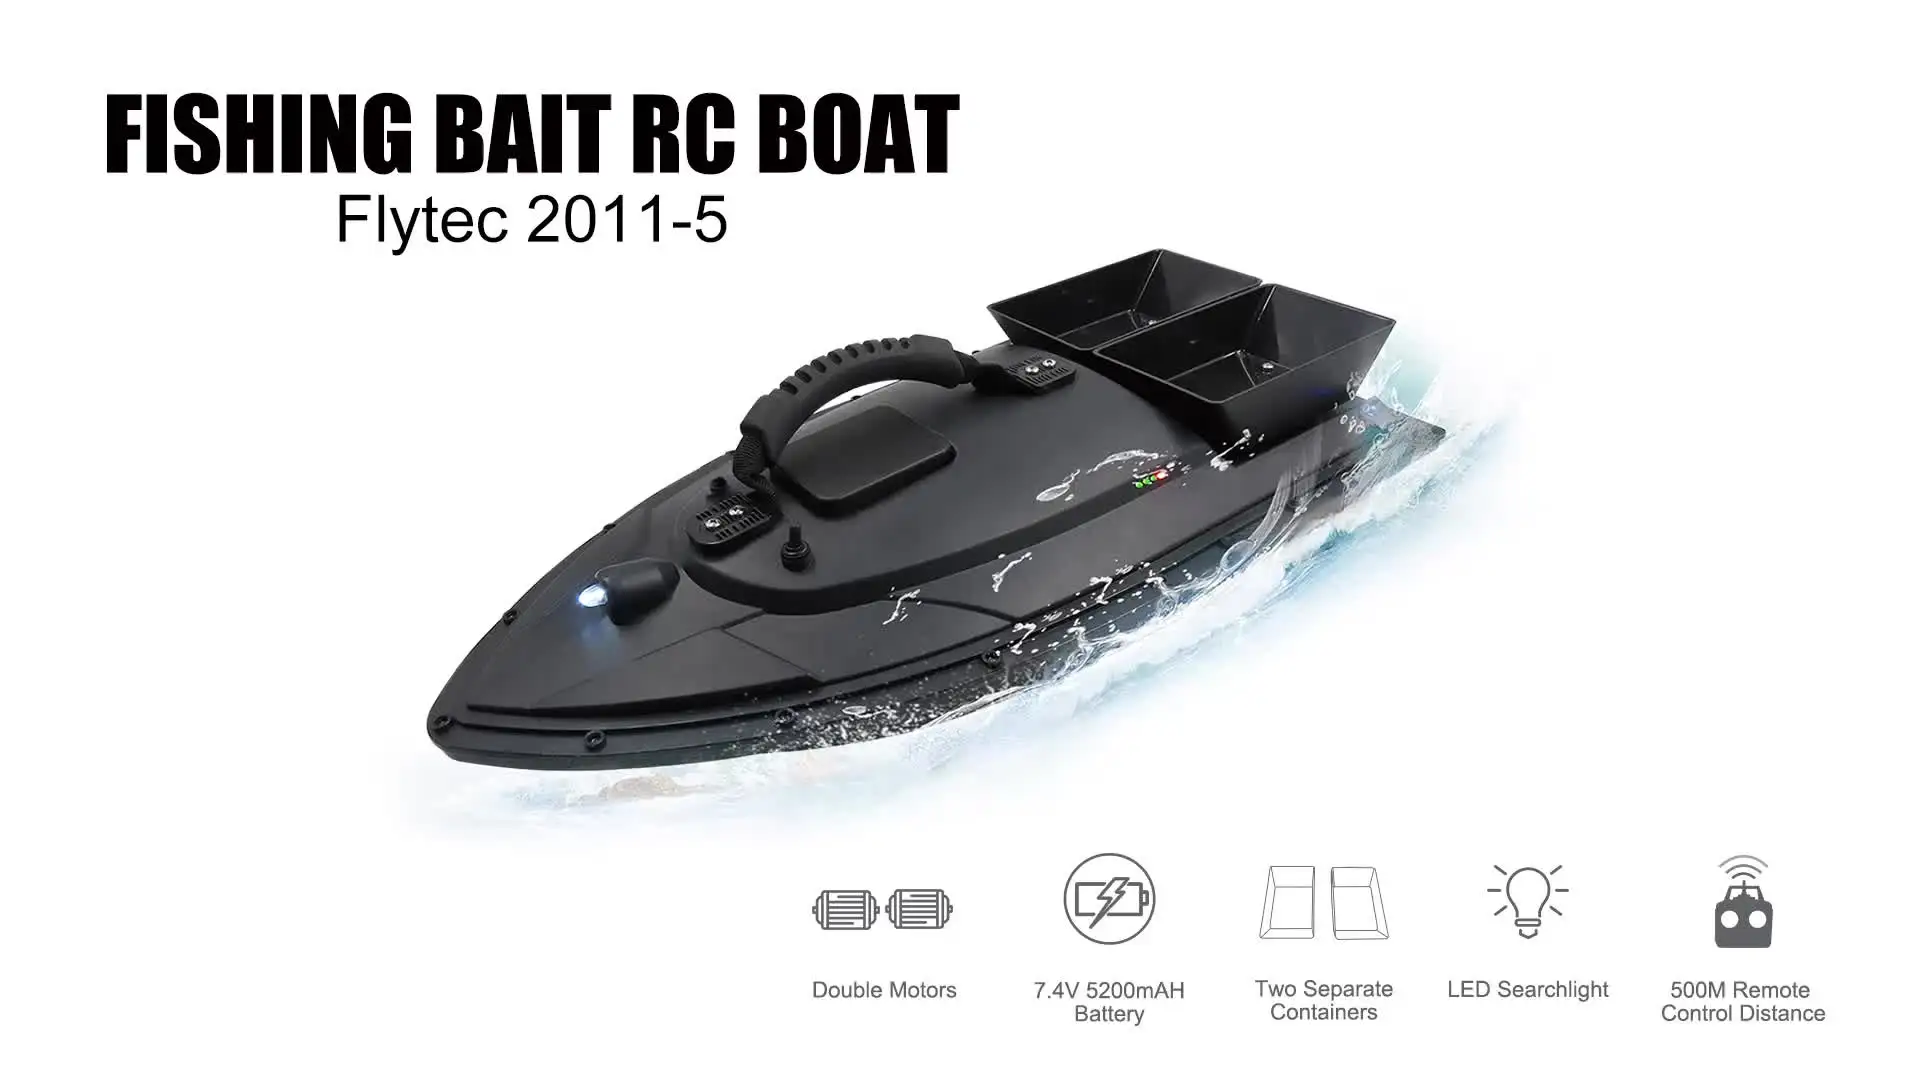 Flytec 2011-5 RC Fishing Bait Boat Hull KIT Set With Electronic Accessories Parts Full Set For DIY Repair Or Remodel